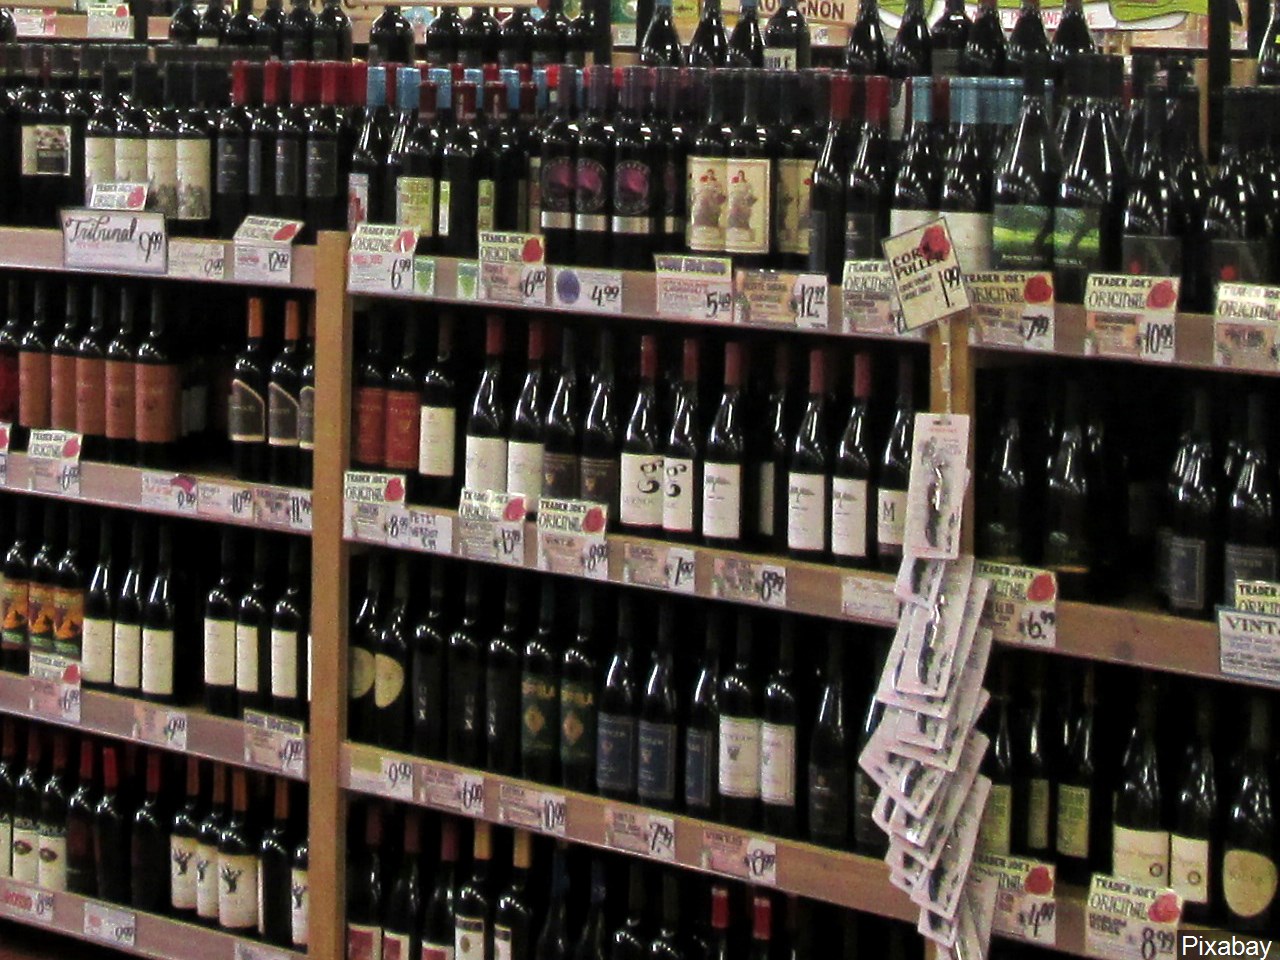 Ship-to-home wine bill among alcohol legislation in State House